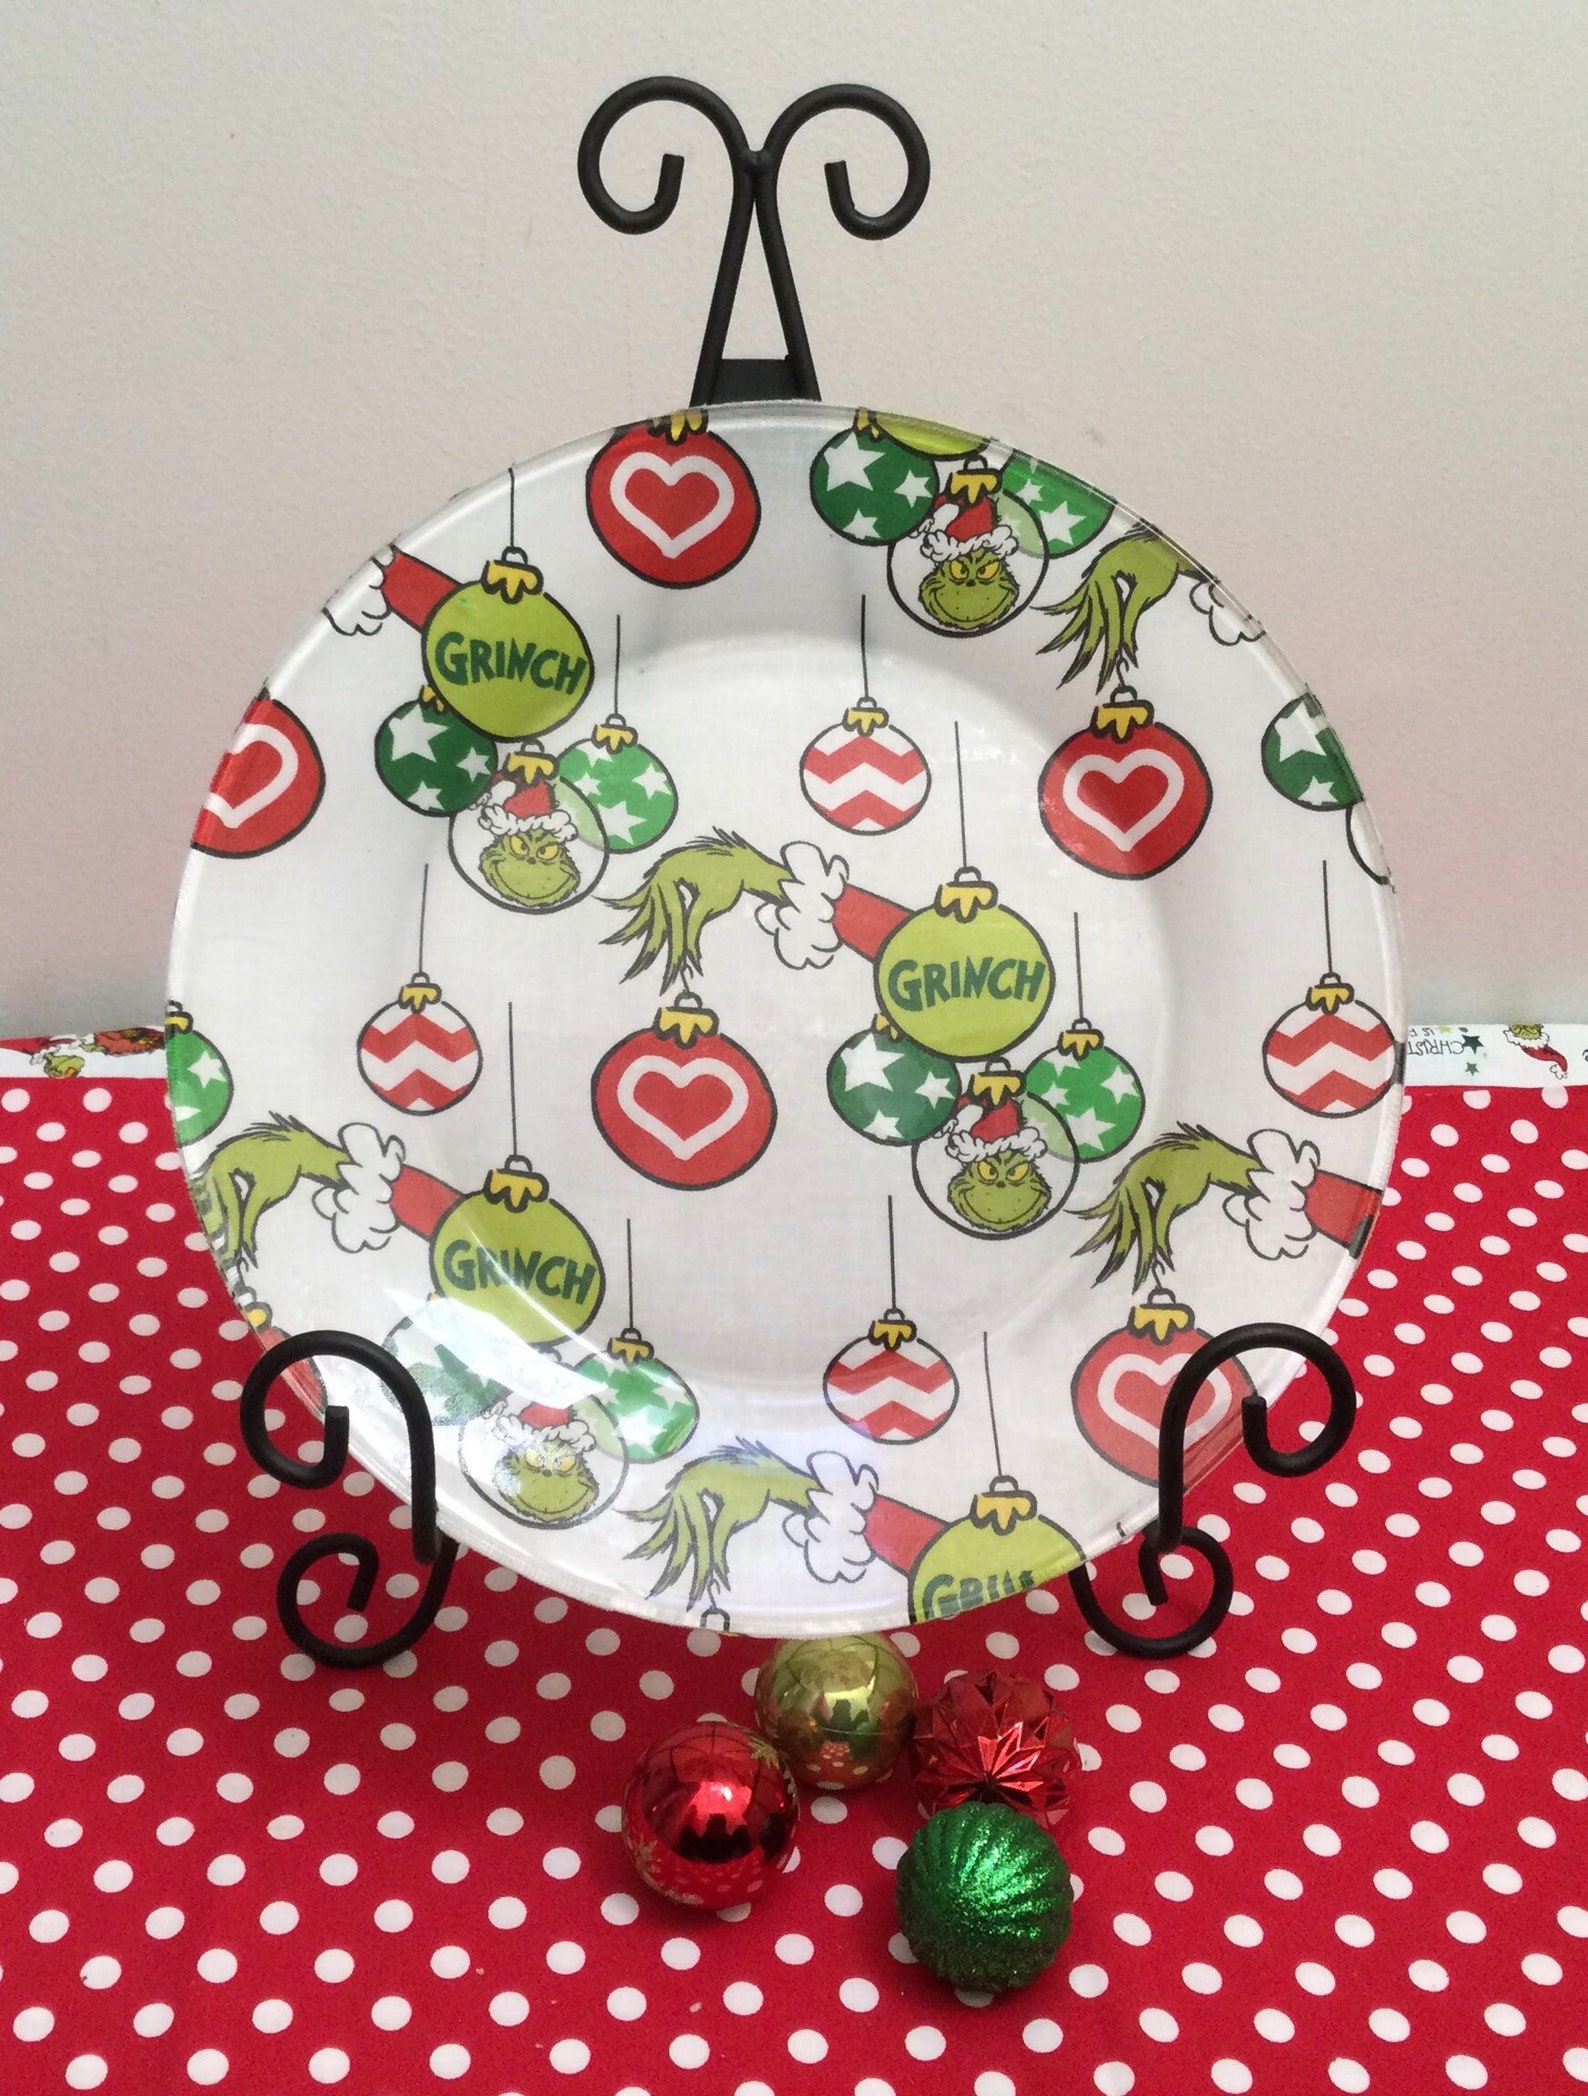 Grinch Ornaments Dinnerware and Accessories by Roses Handmade Gallery